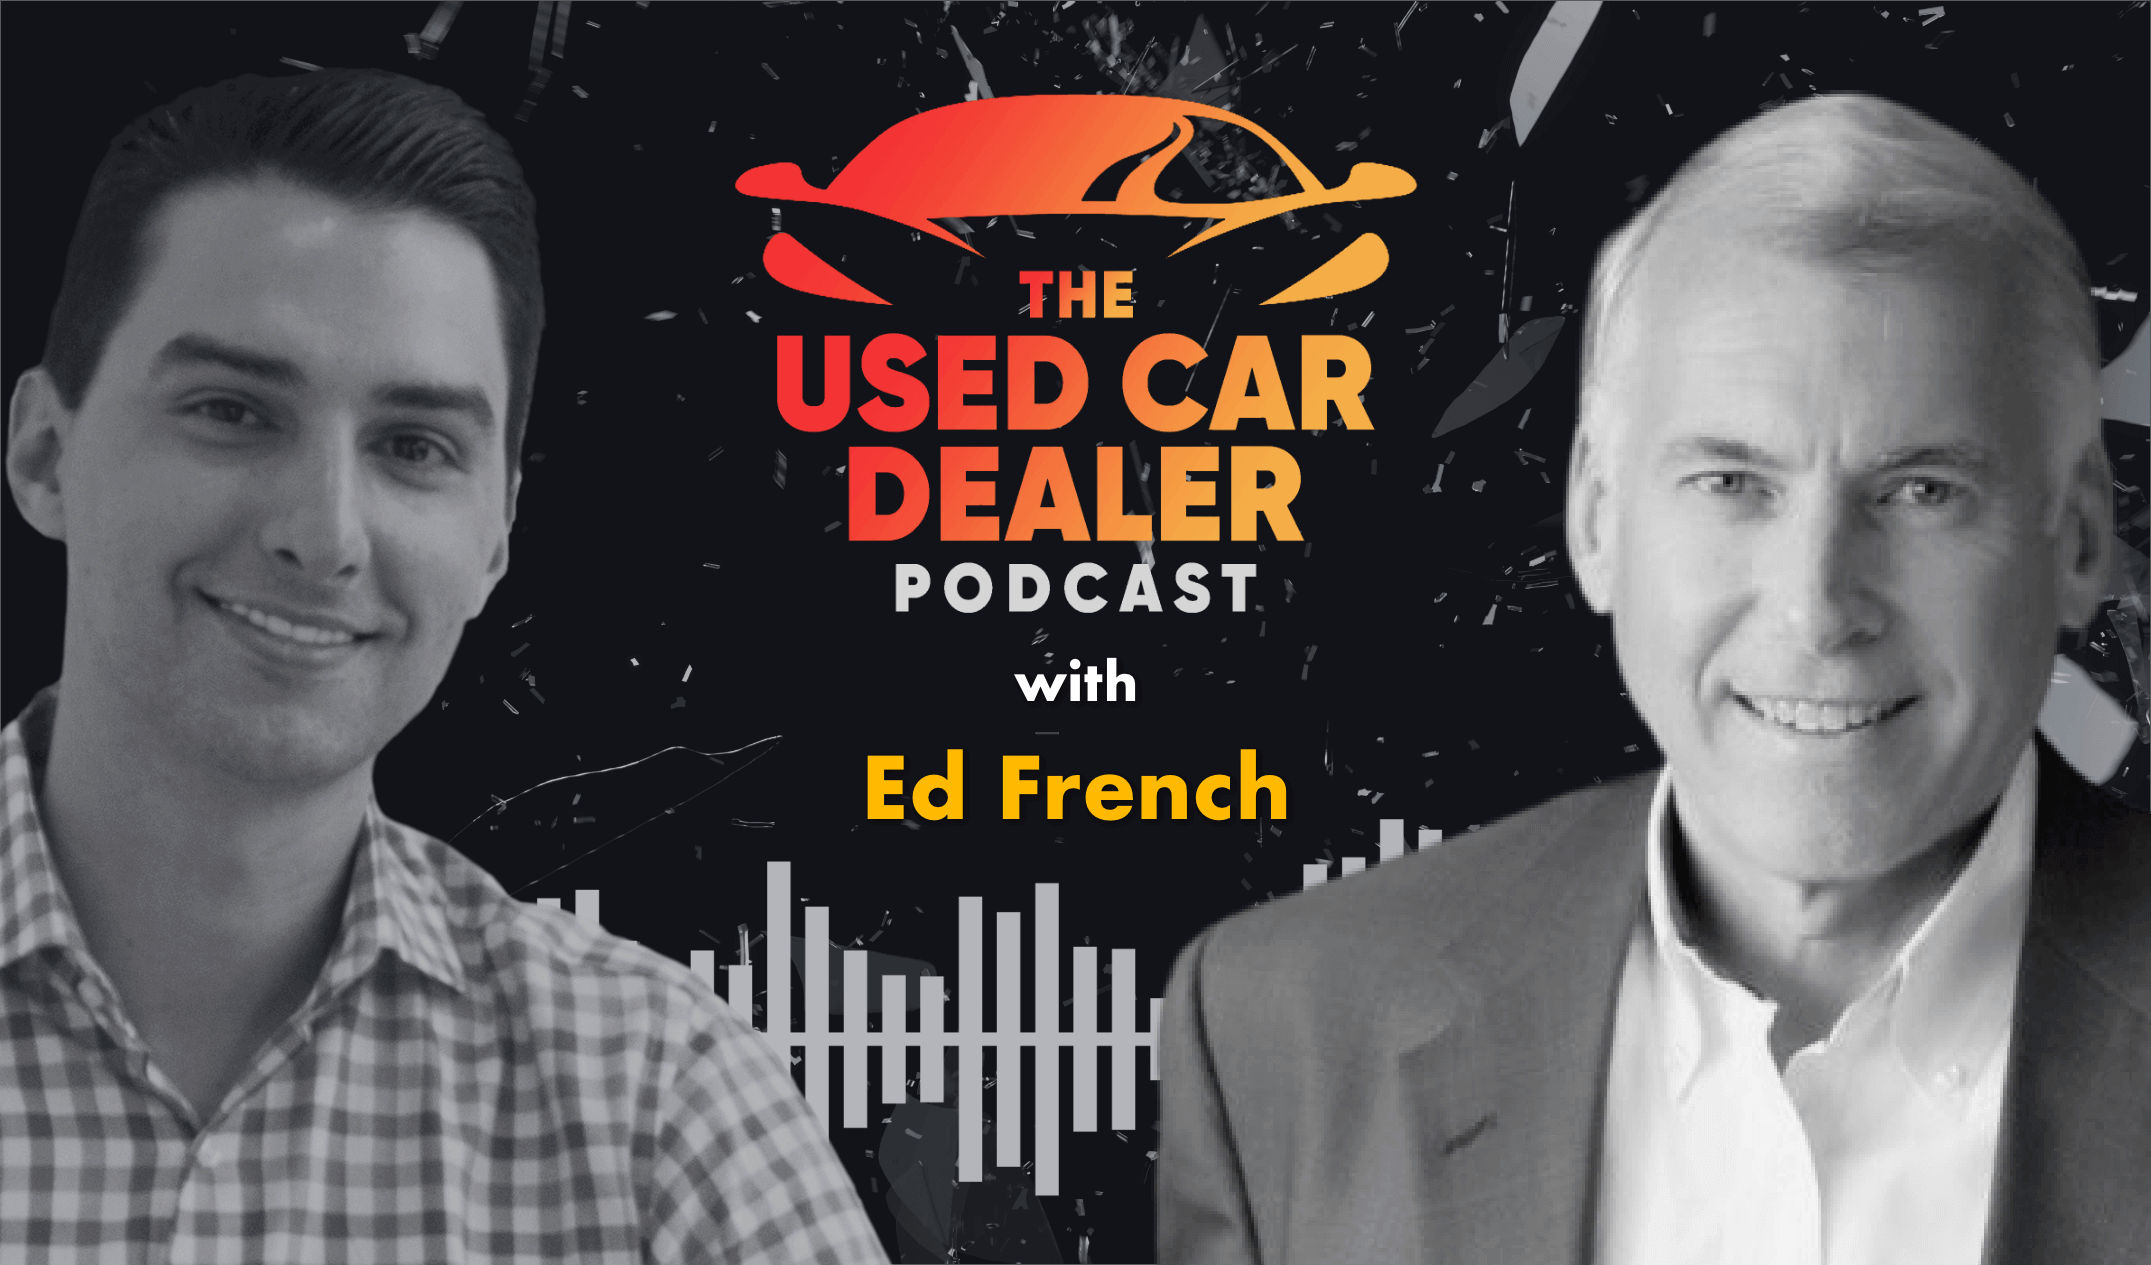 Interview with Ed French on Used Cars, Service, and Human Capital